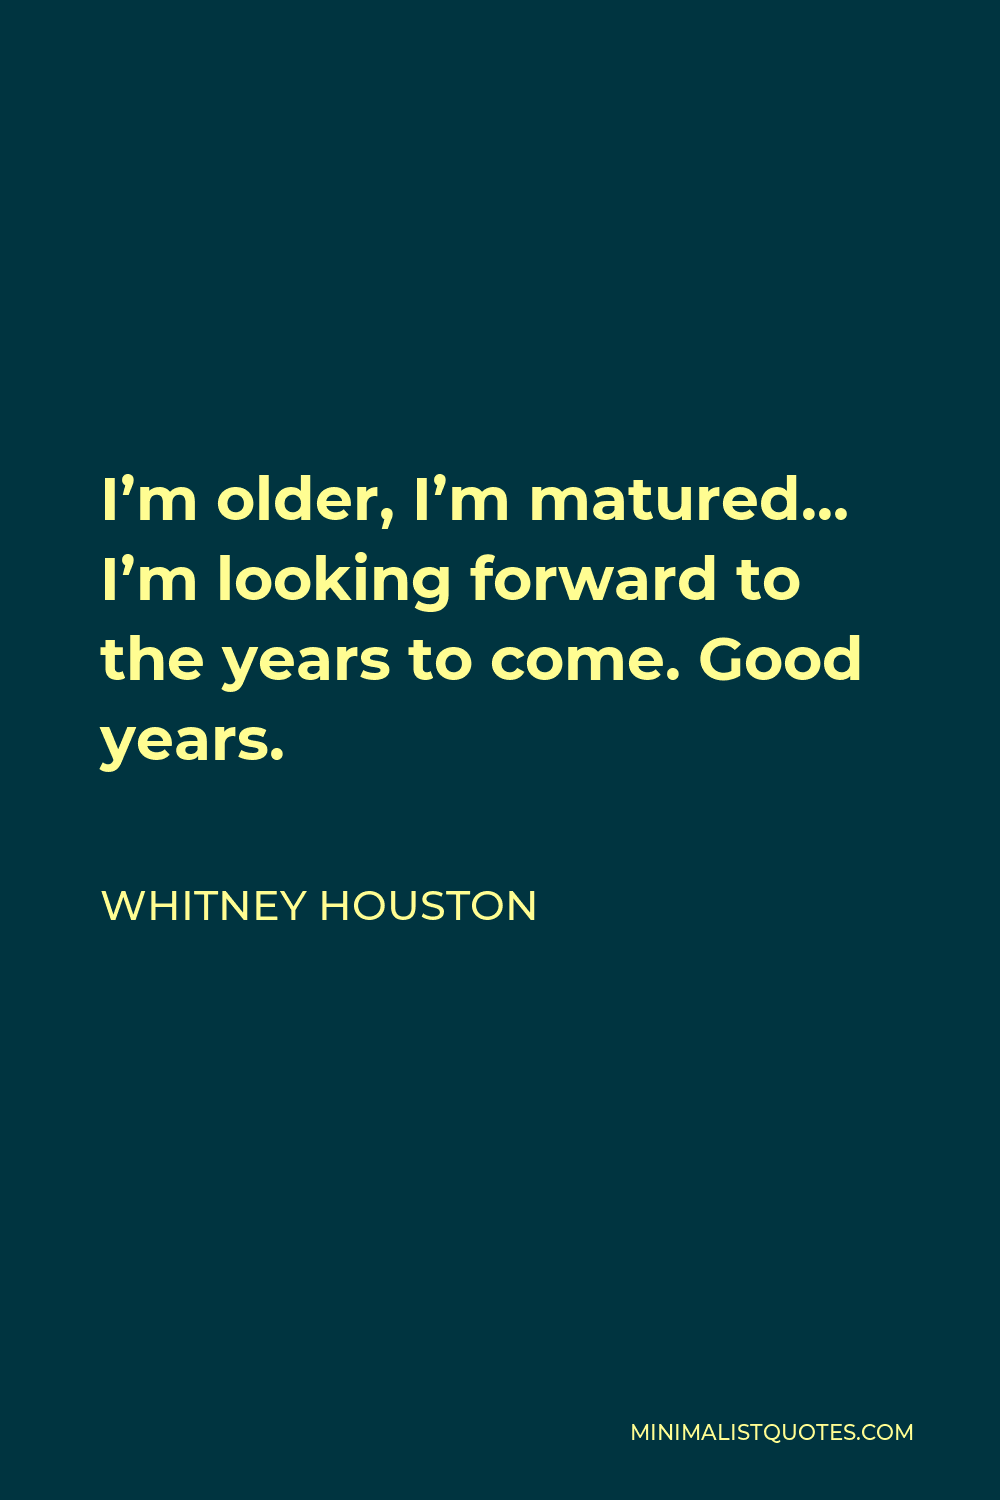 Whitney Houston Quote - I’m older, I’m matured… I’m looking forward to the years to come. Good years.